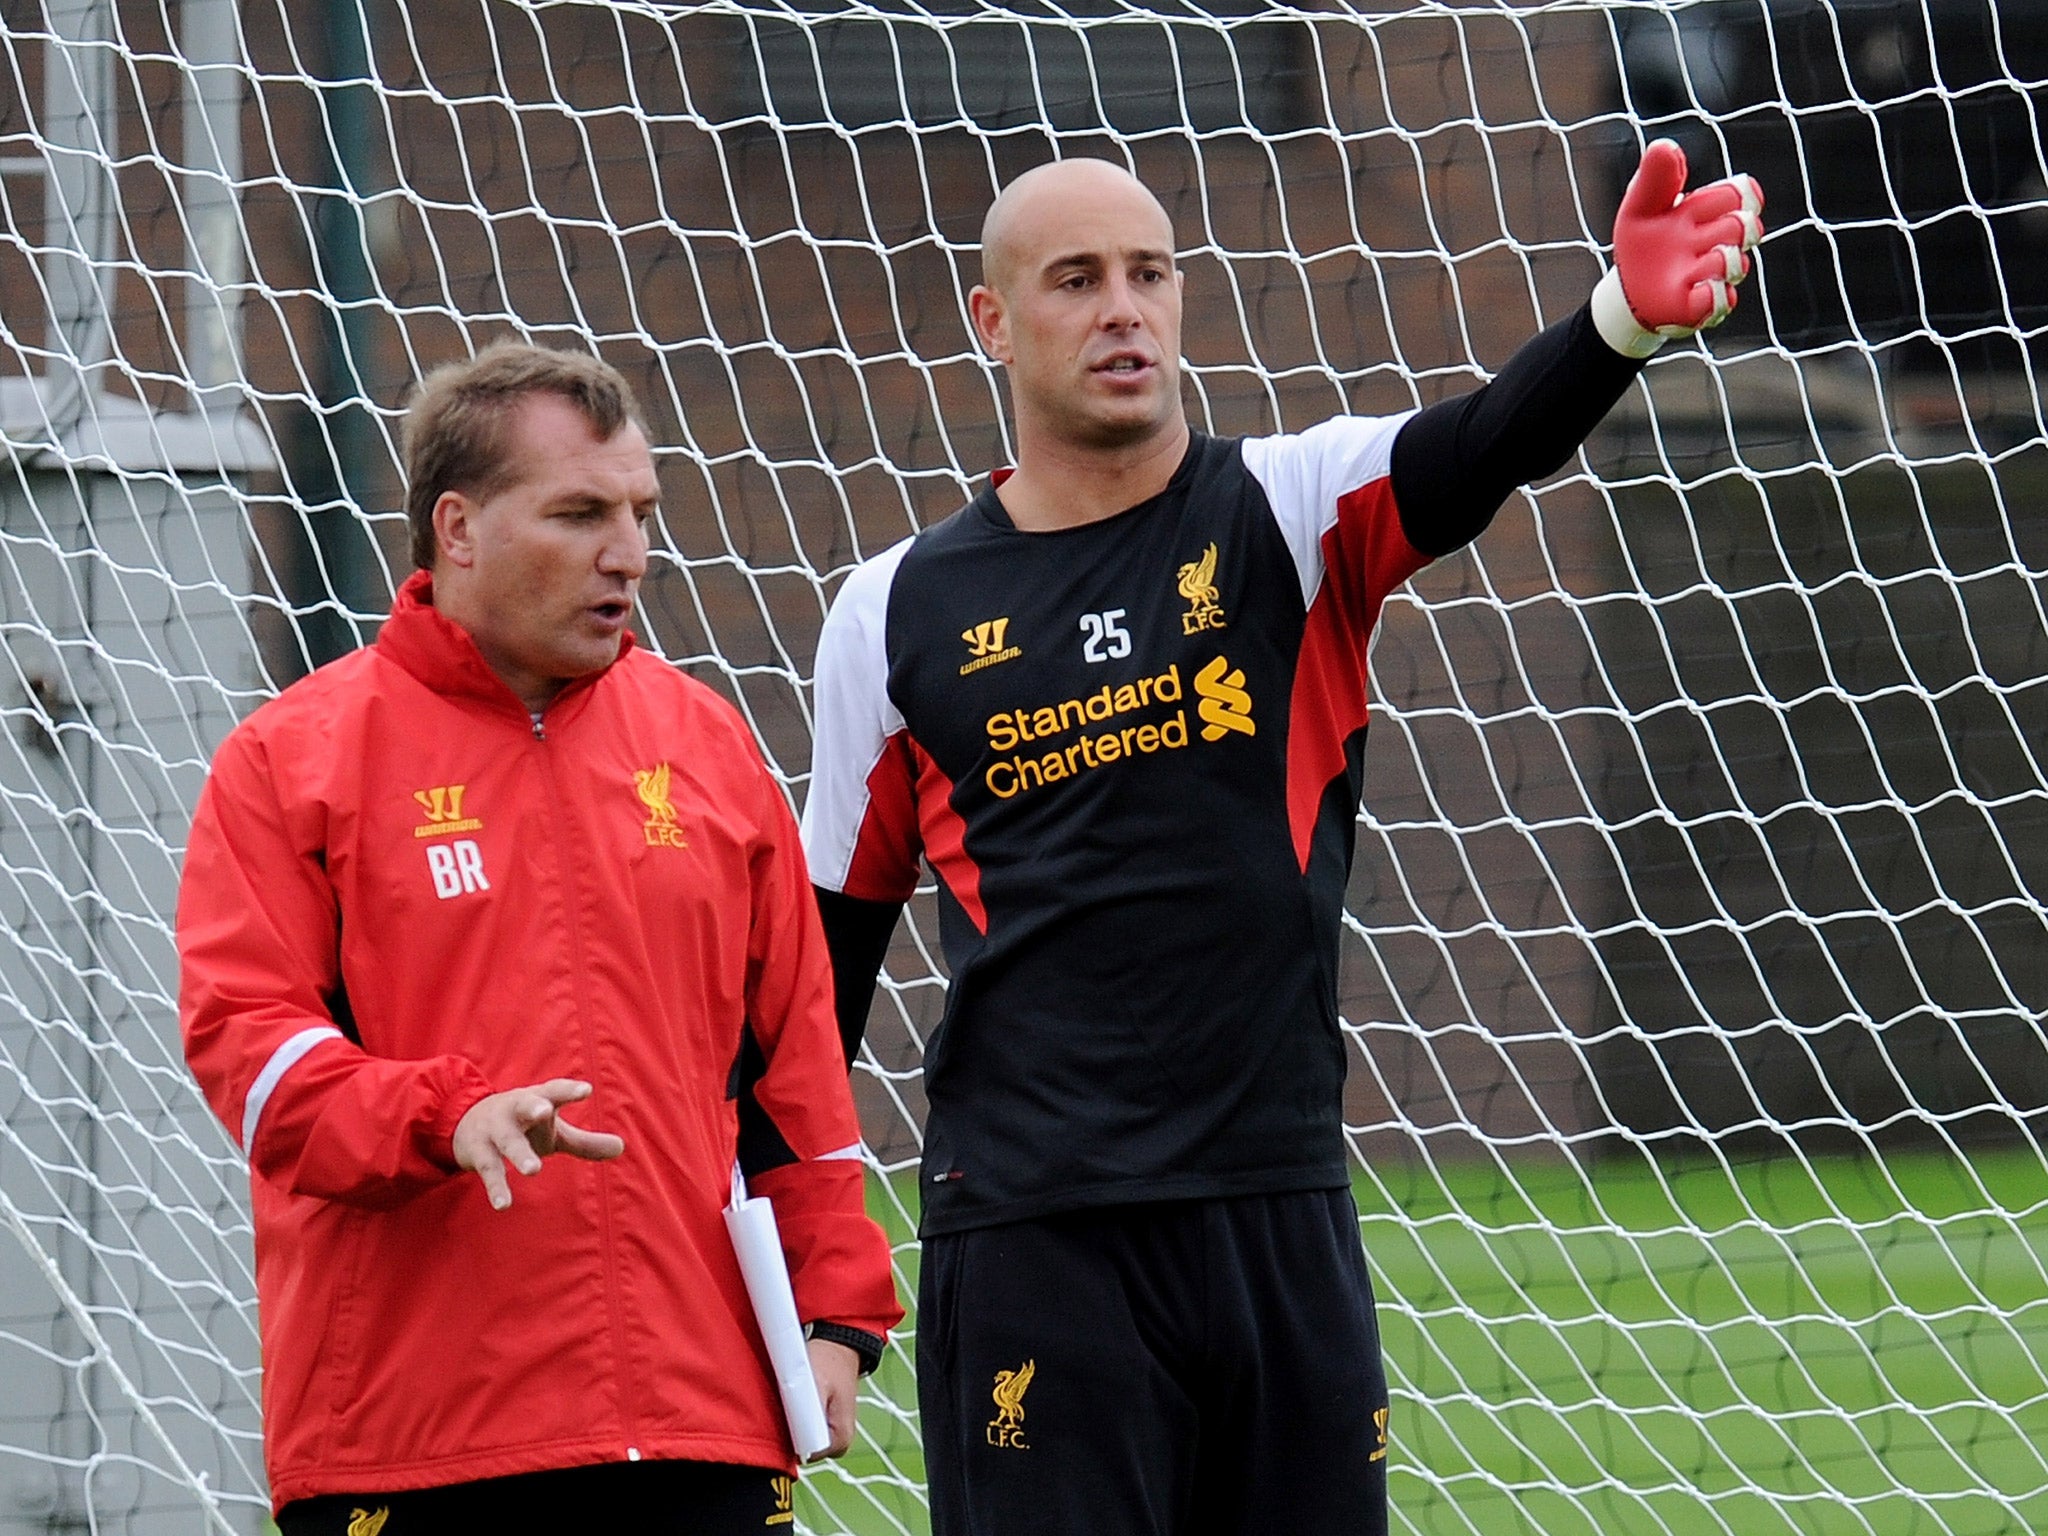 Rodgers, left, and Reina have a discussion during a training session in 2012